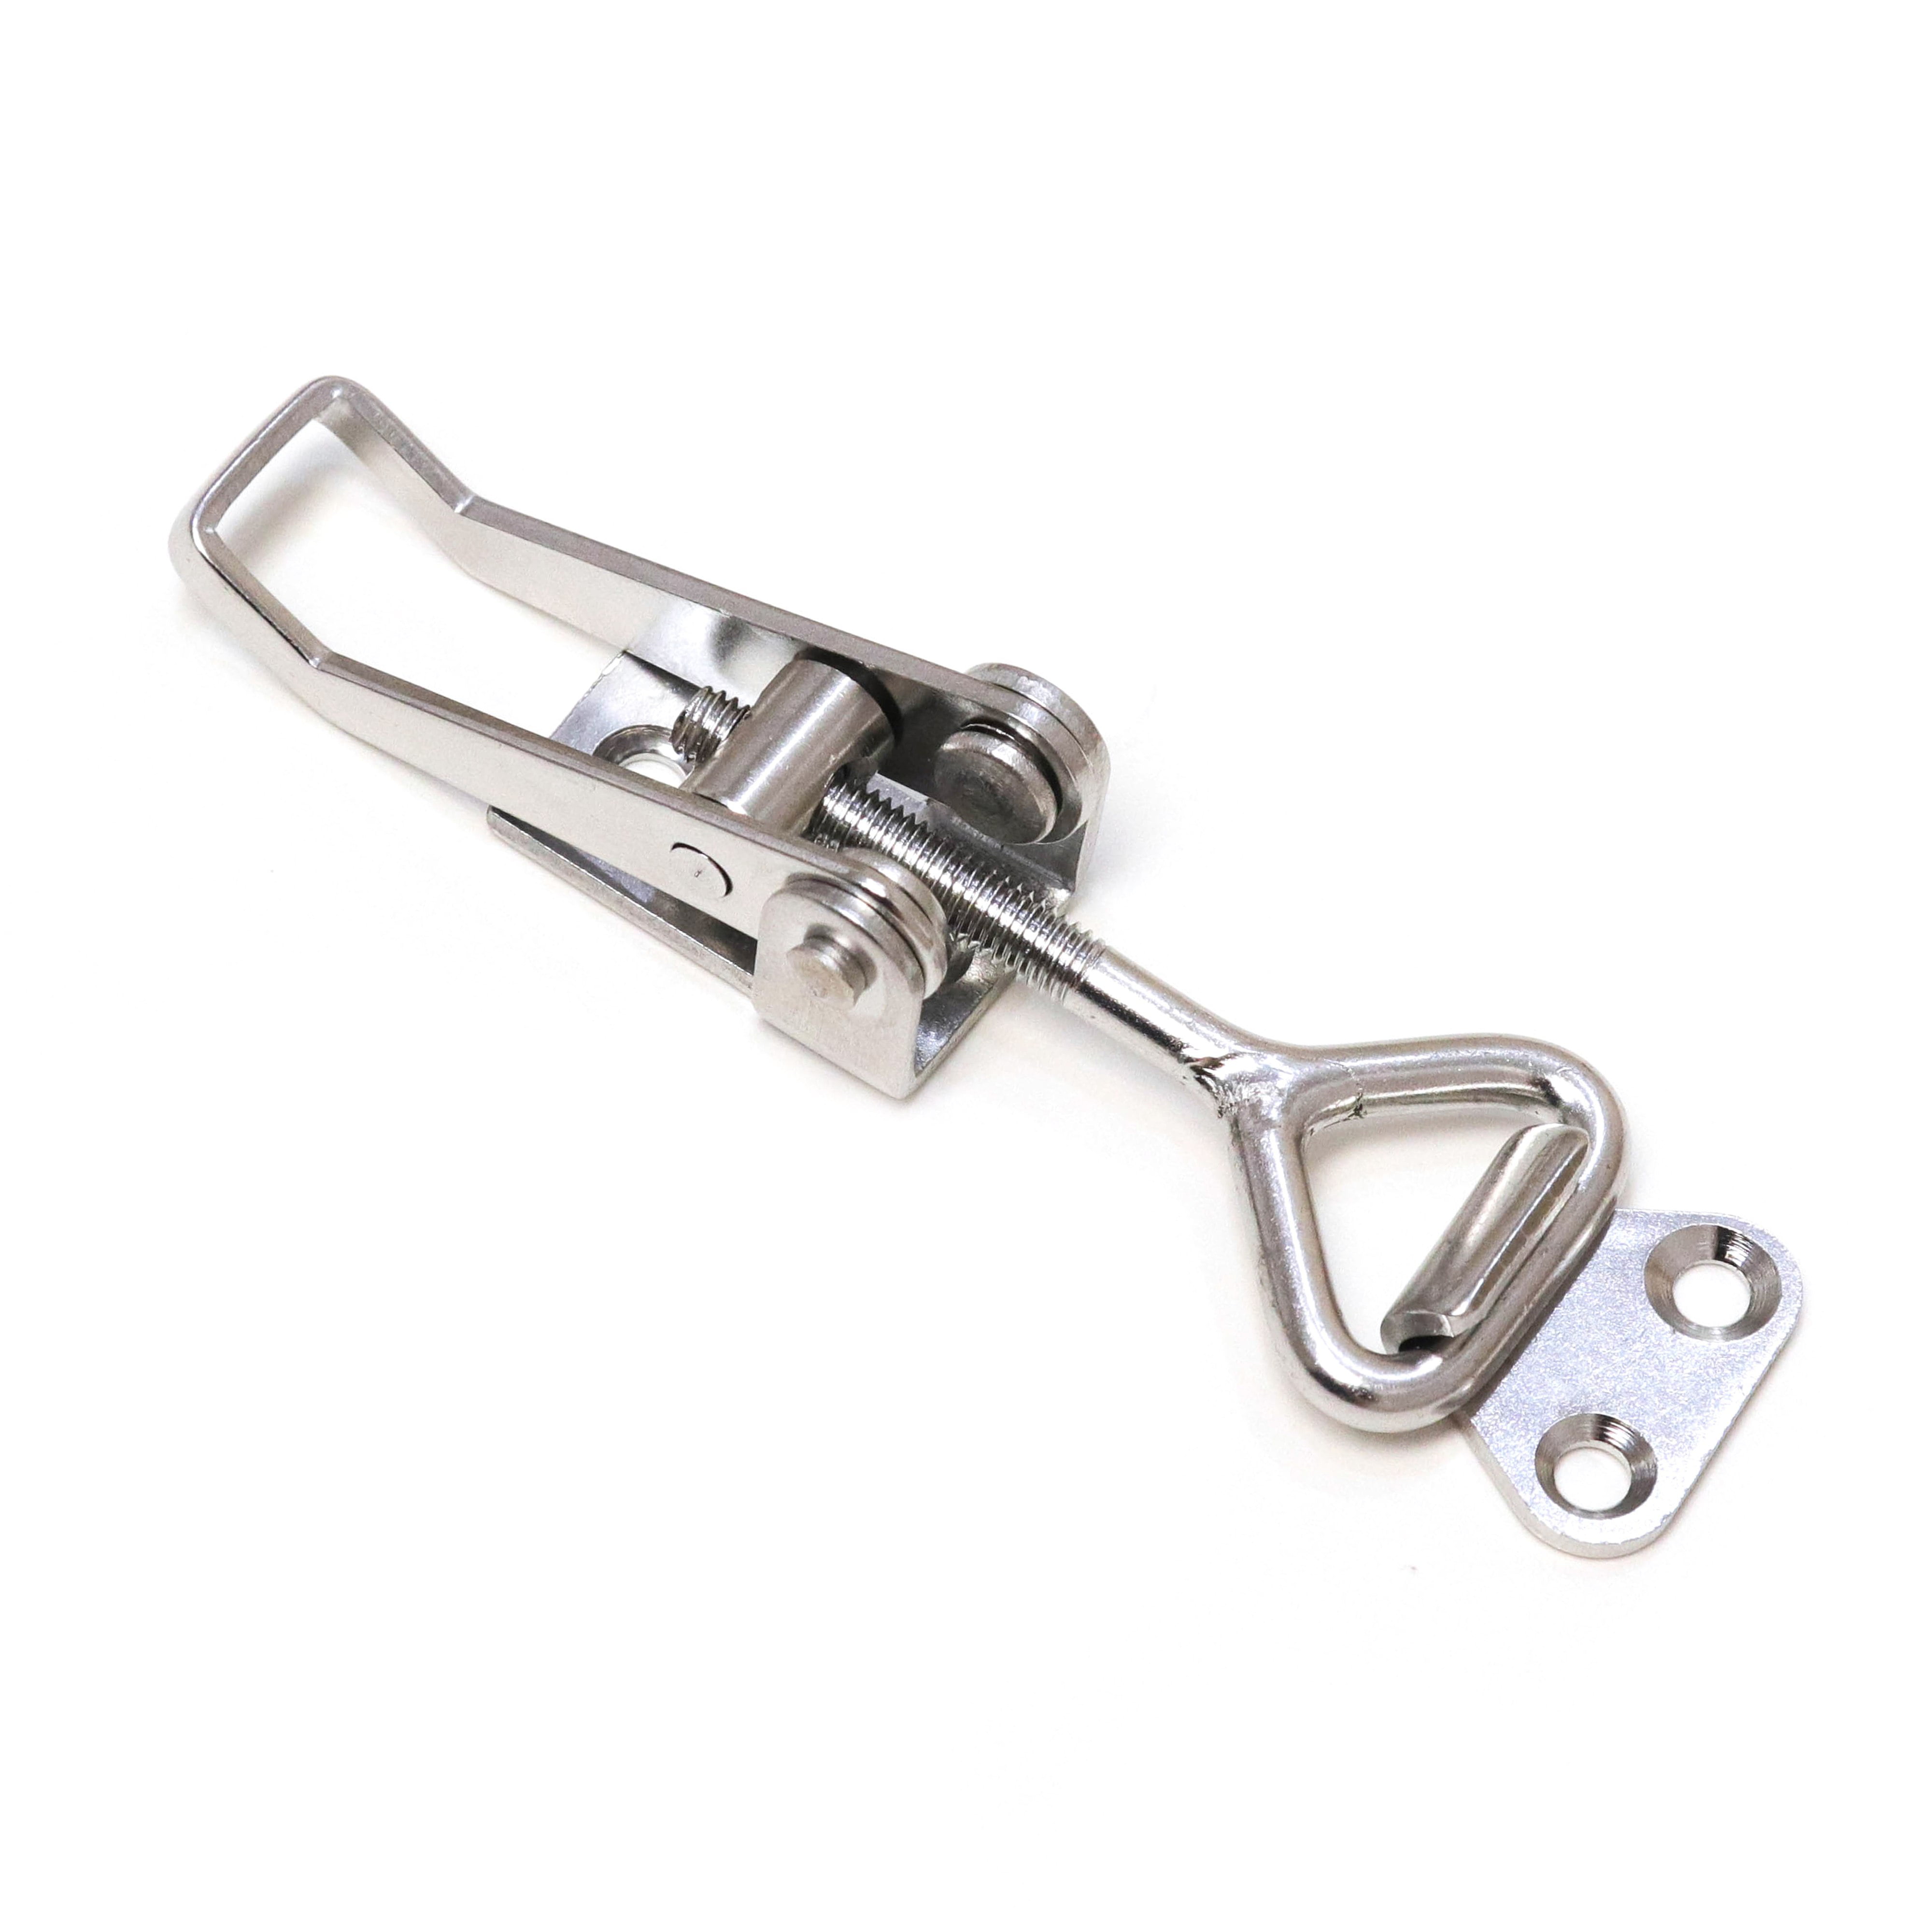 304 mm long 304 stainless steel clamps for box case closures lever closures pack of 1 